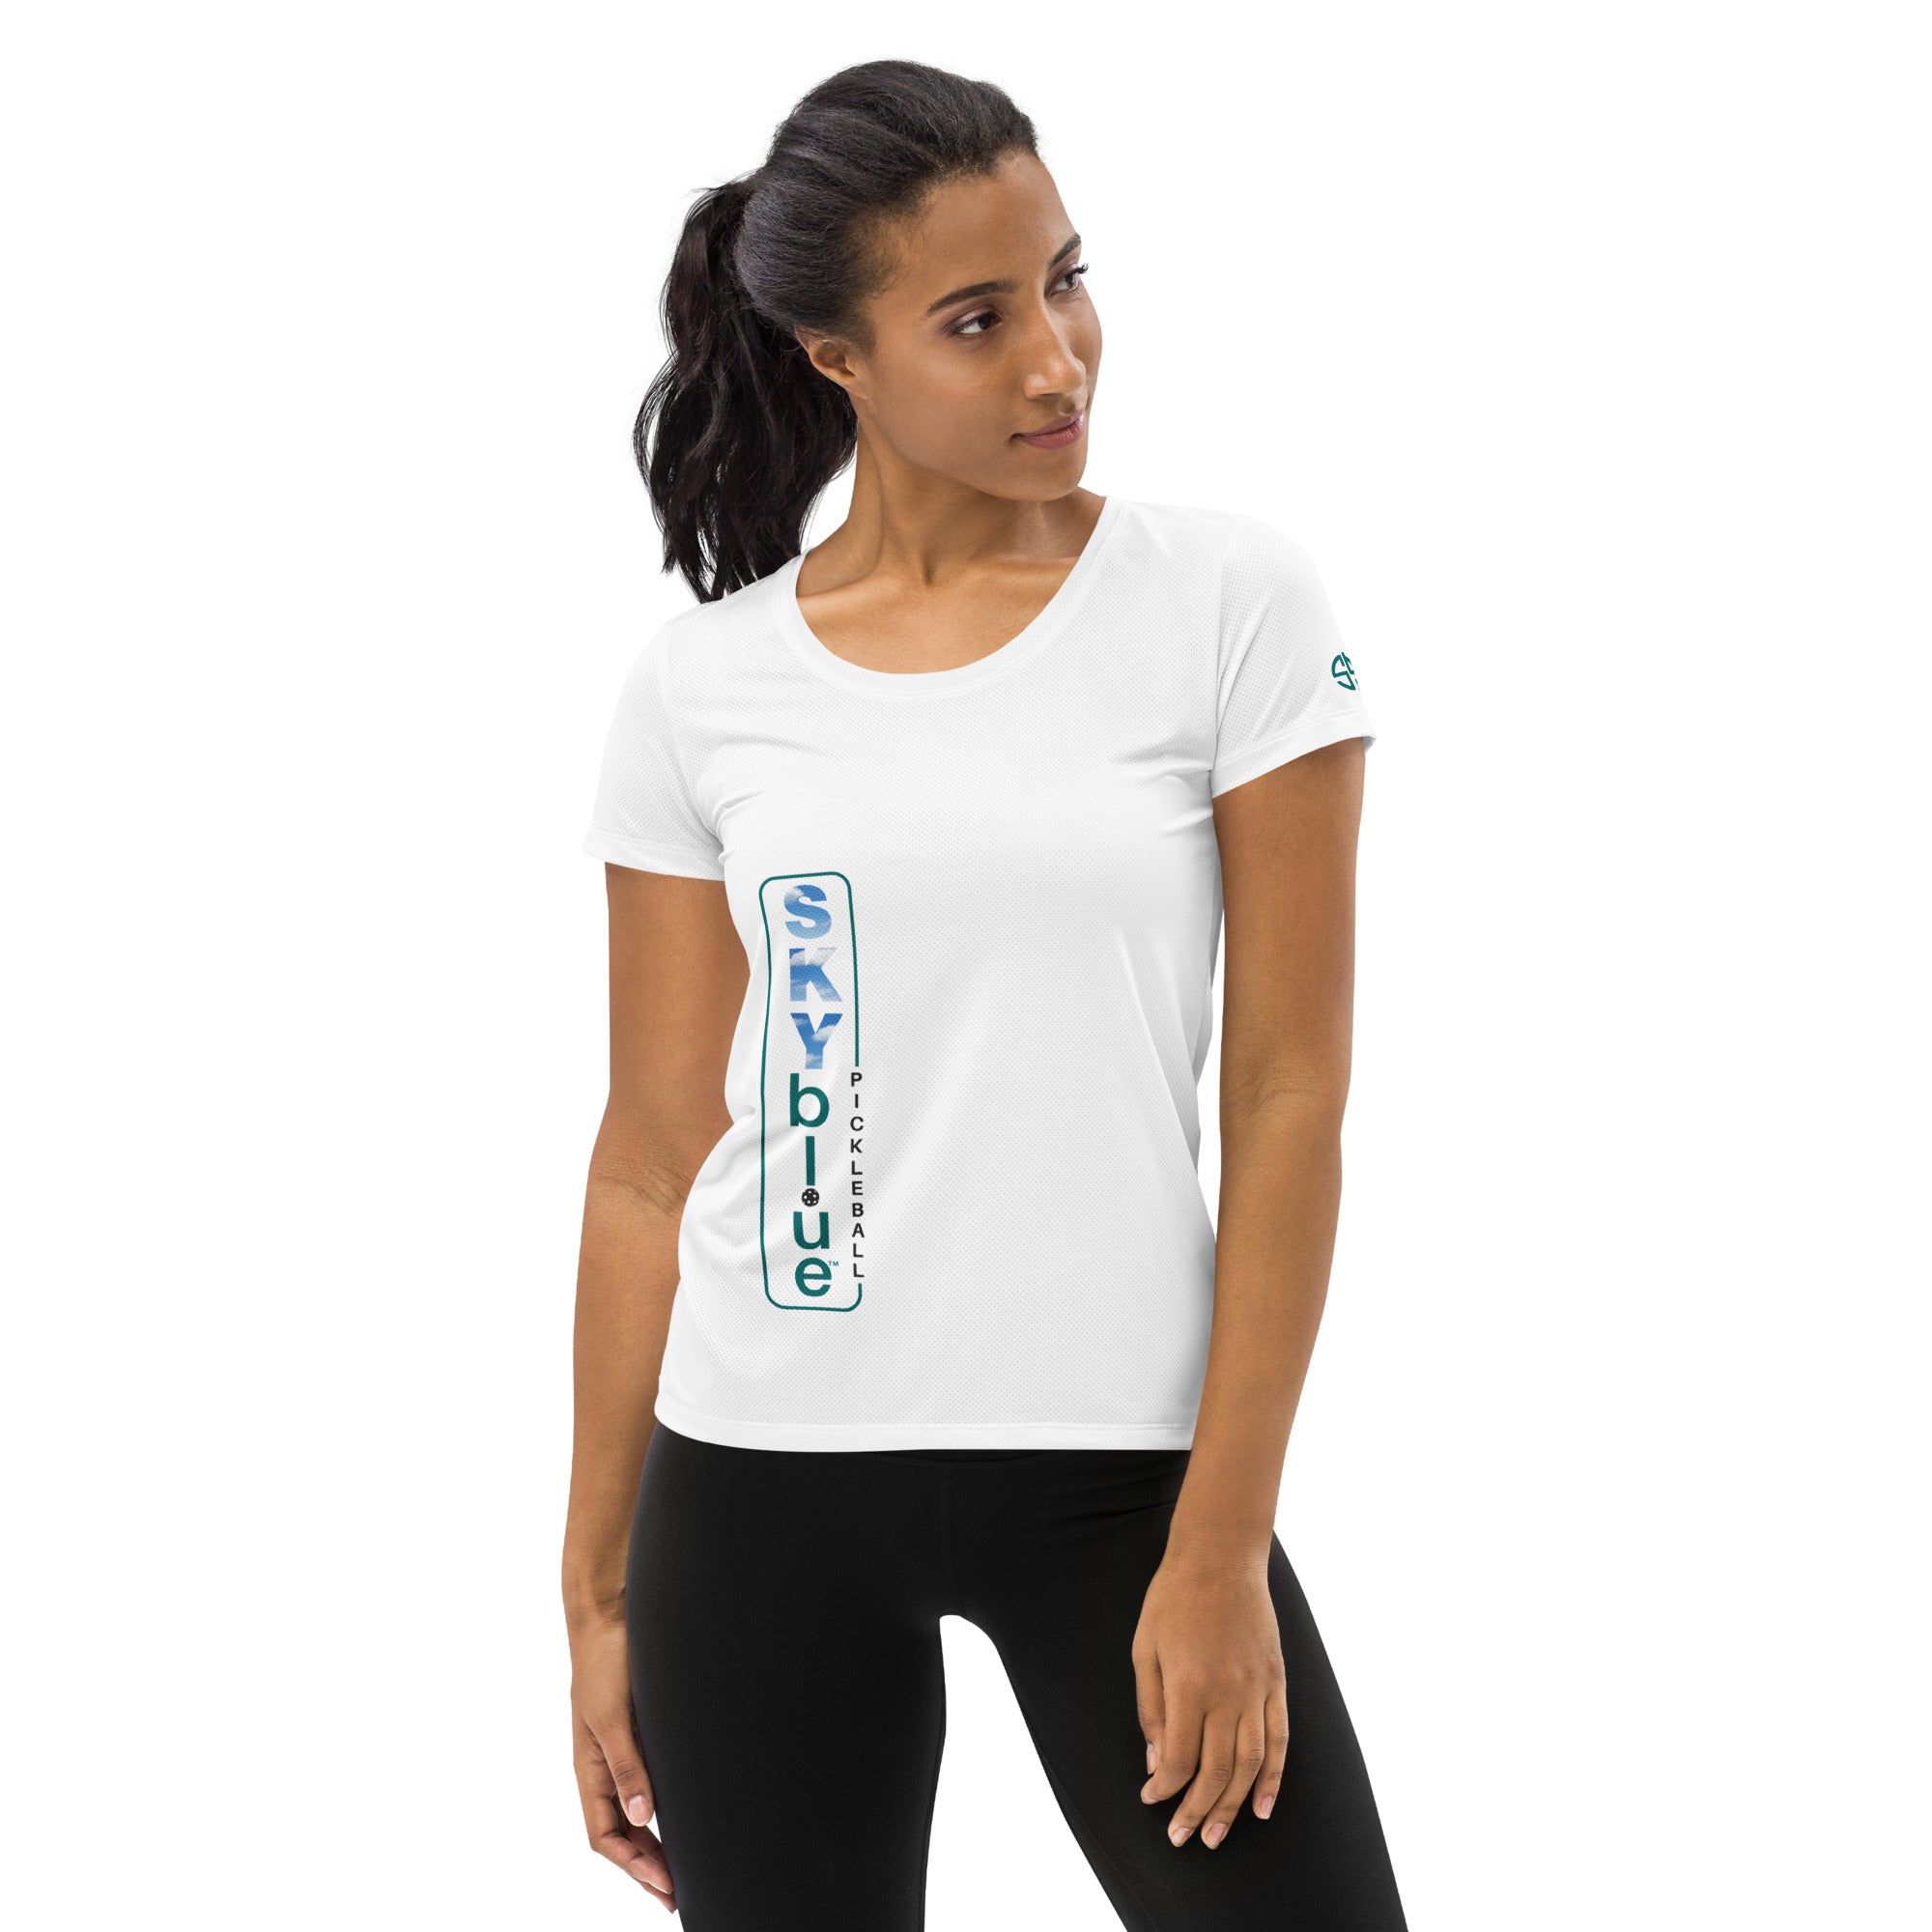 SKYblue™ Black Women's Performance Athletic T-Shirt for Pickleball Enthusiasts - Play Pickleball in Style! for Happy Hour Pattern